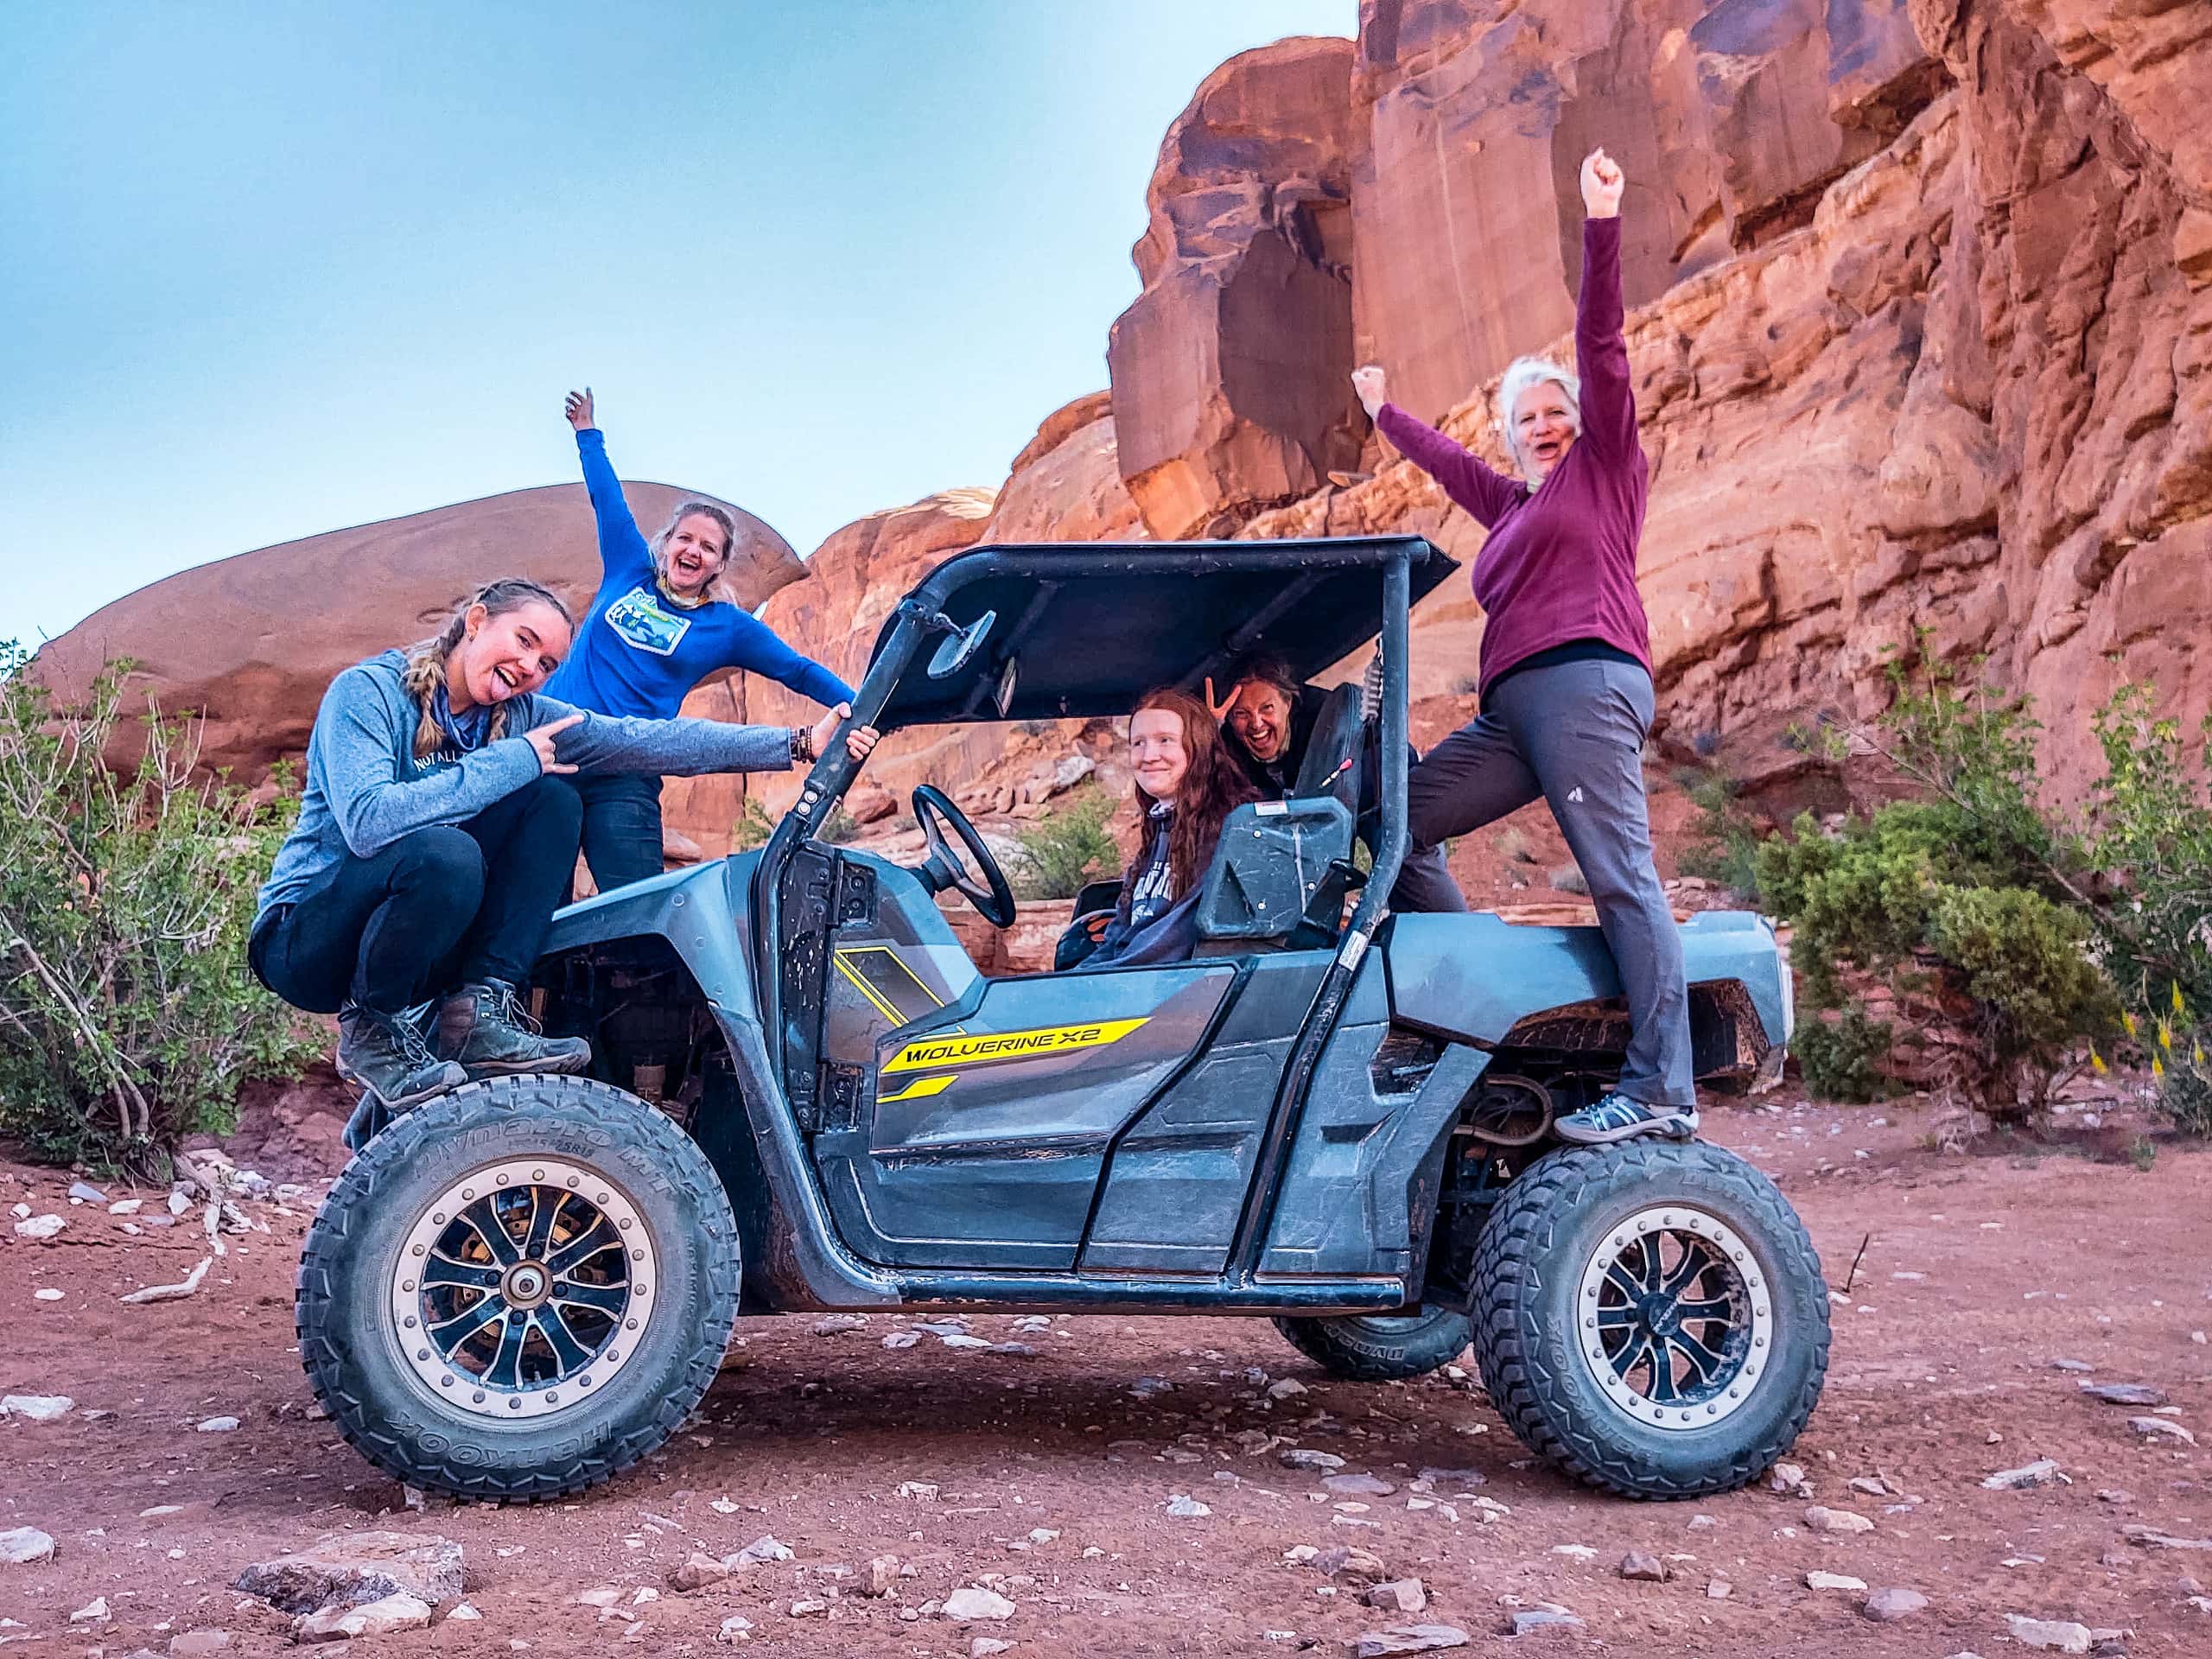 Moab Hiking, Rappelling, and Off Road Weekend